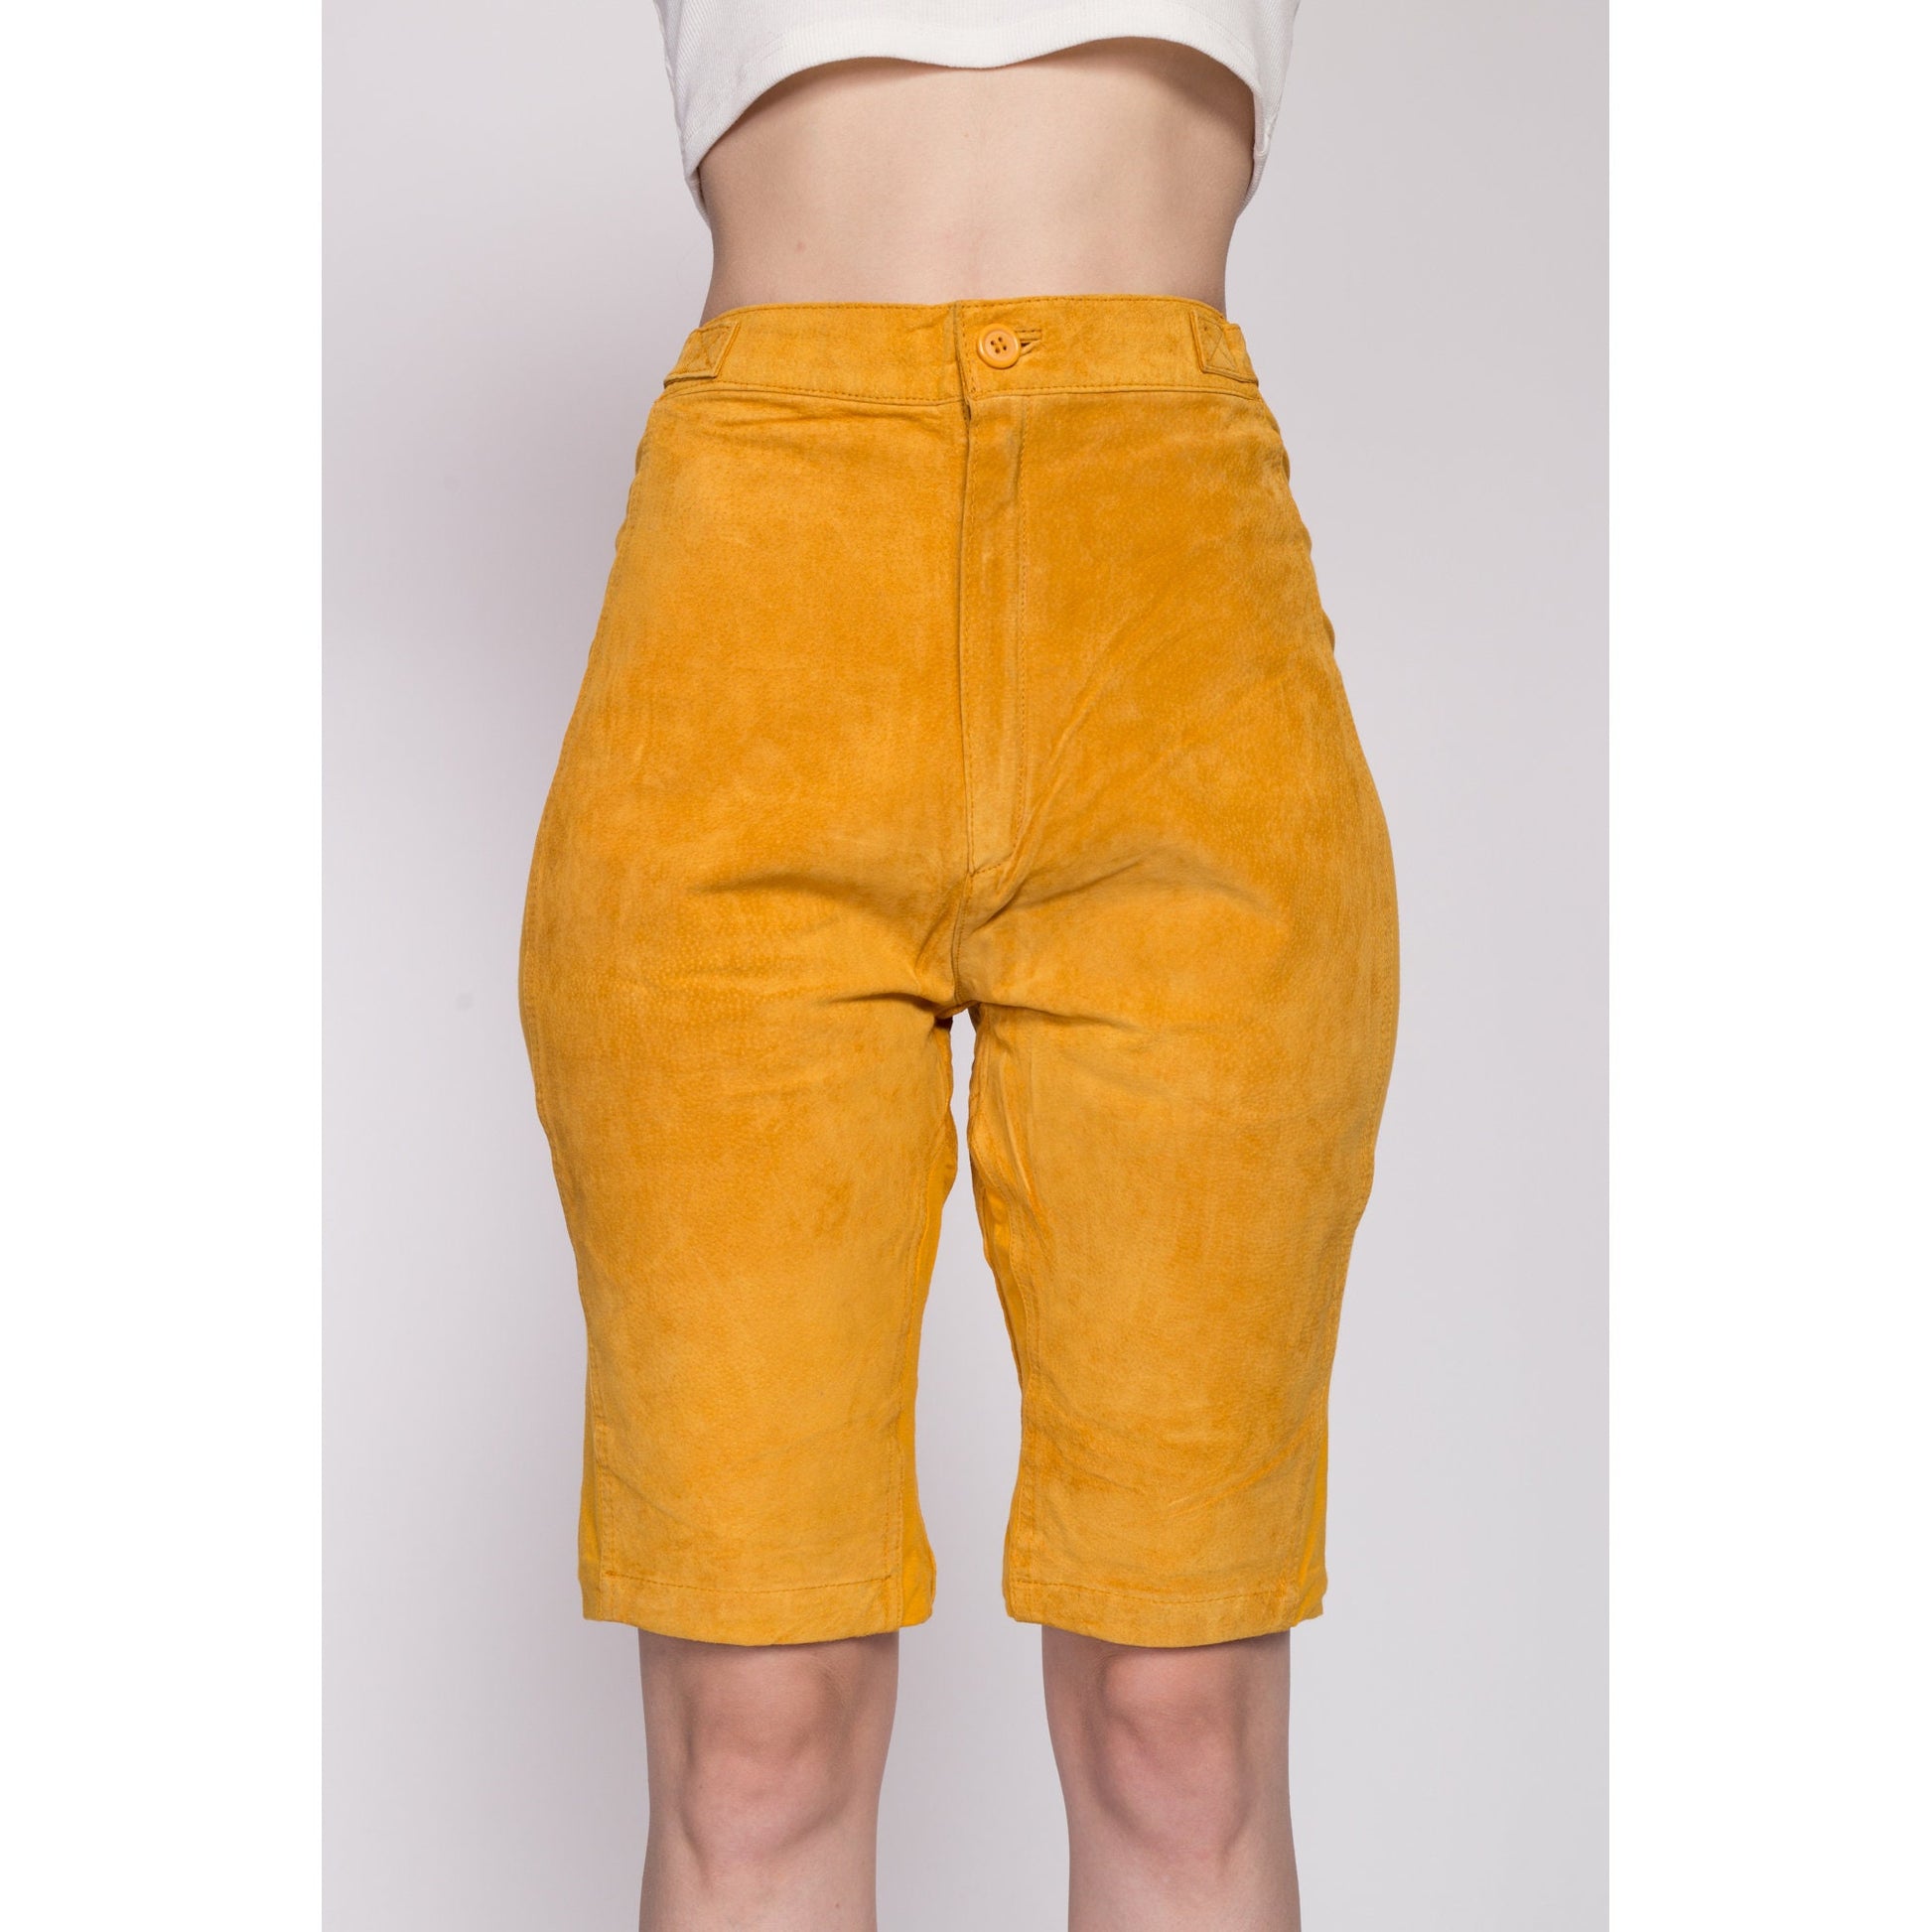 M| Vintage Yellow Suede Biker Shorts, Deadstock - Medium | 80s 90s High Waisted Adjustable Leather Motorcycle Riding Gear